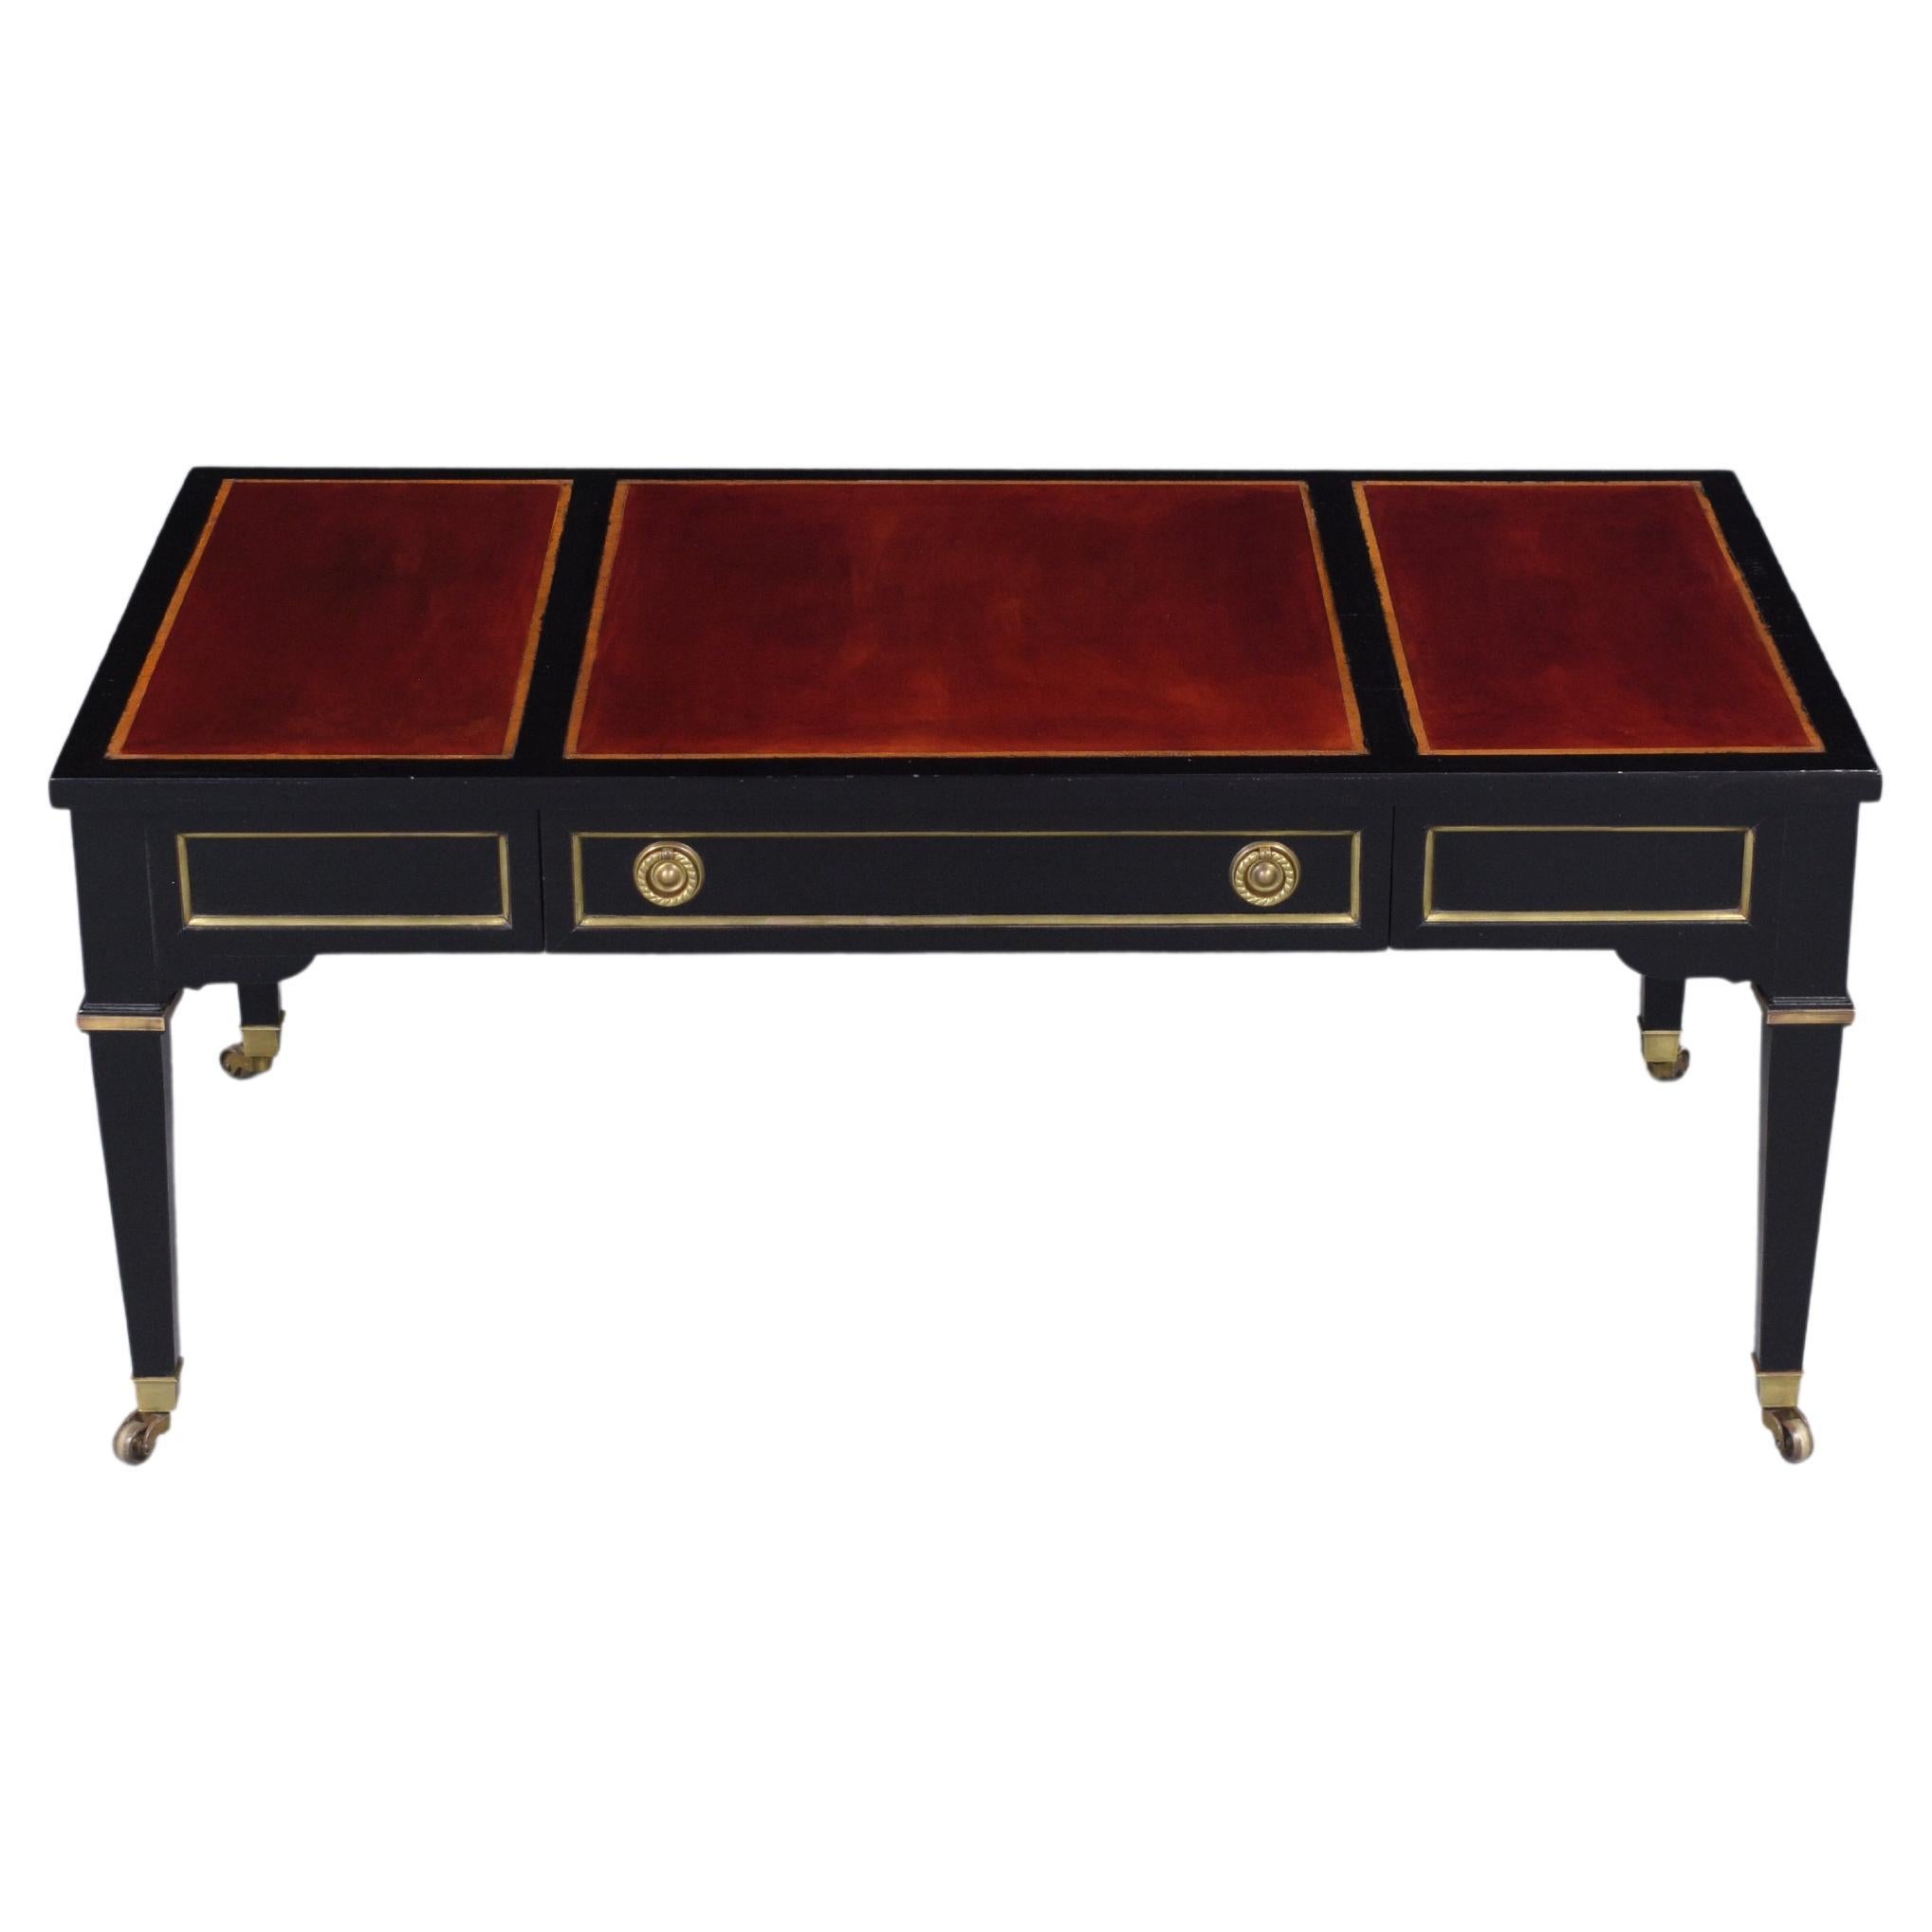 Hollywood Regency-Style Coffee Table by Heritage Henredon: 1960s Luxury For Sale